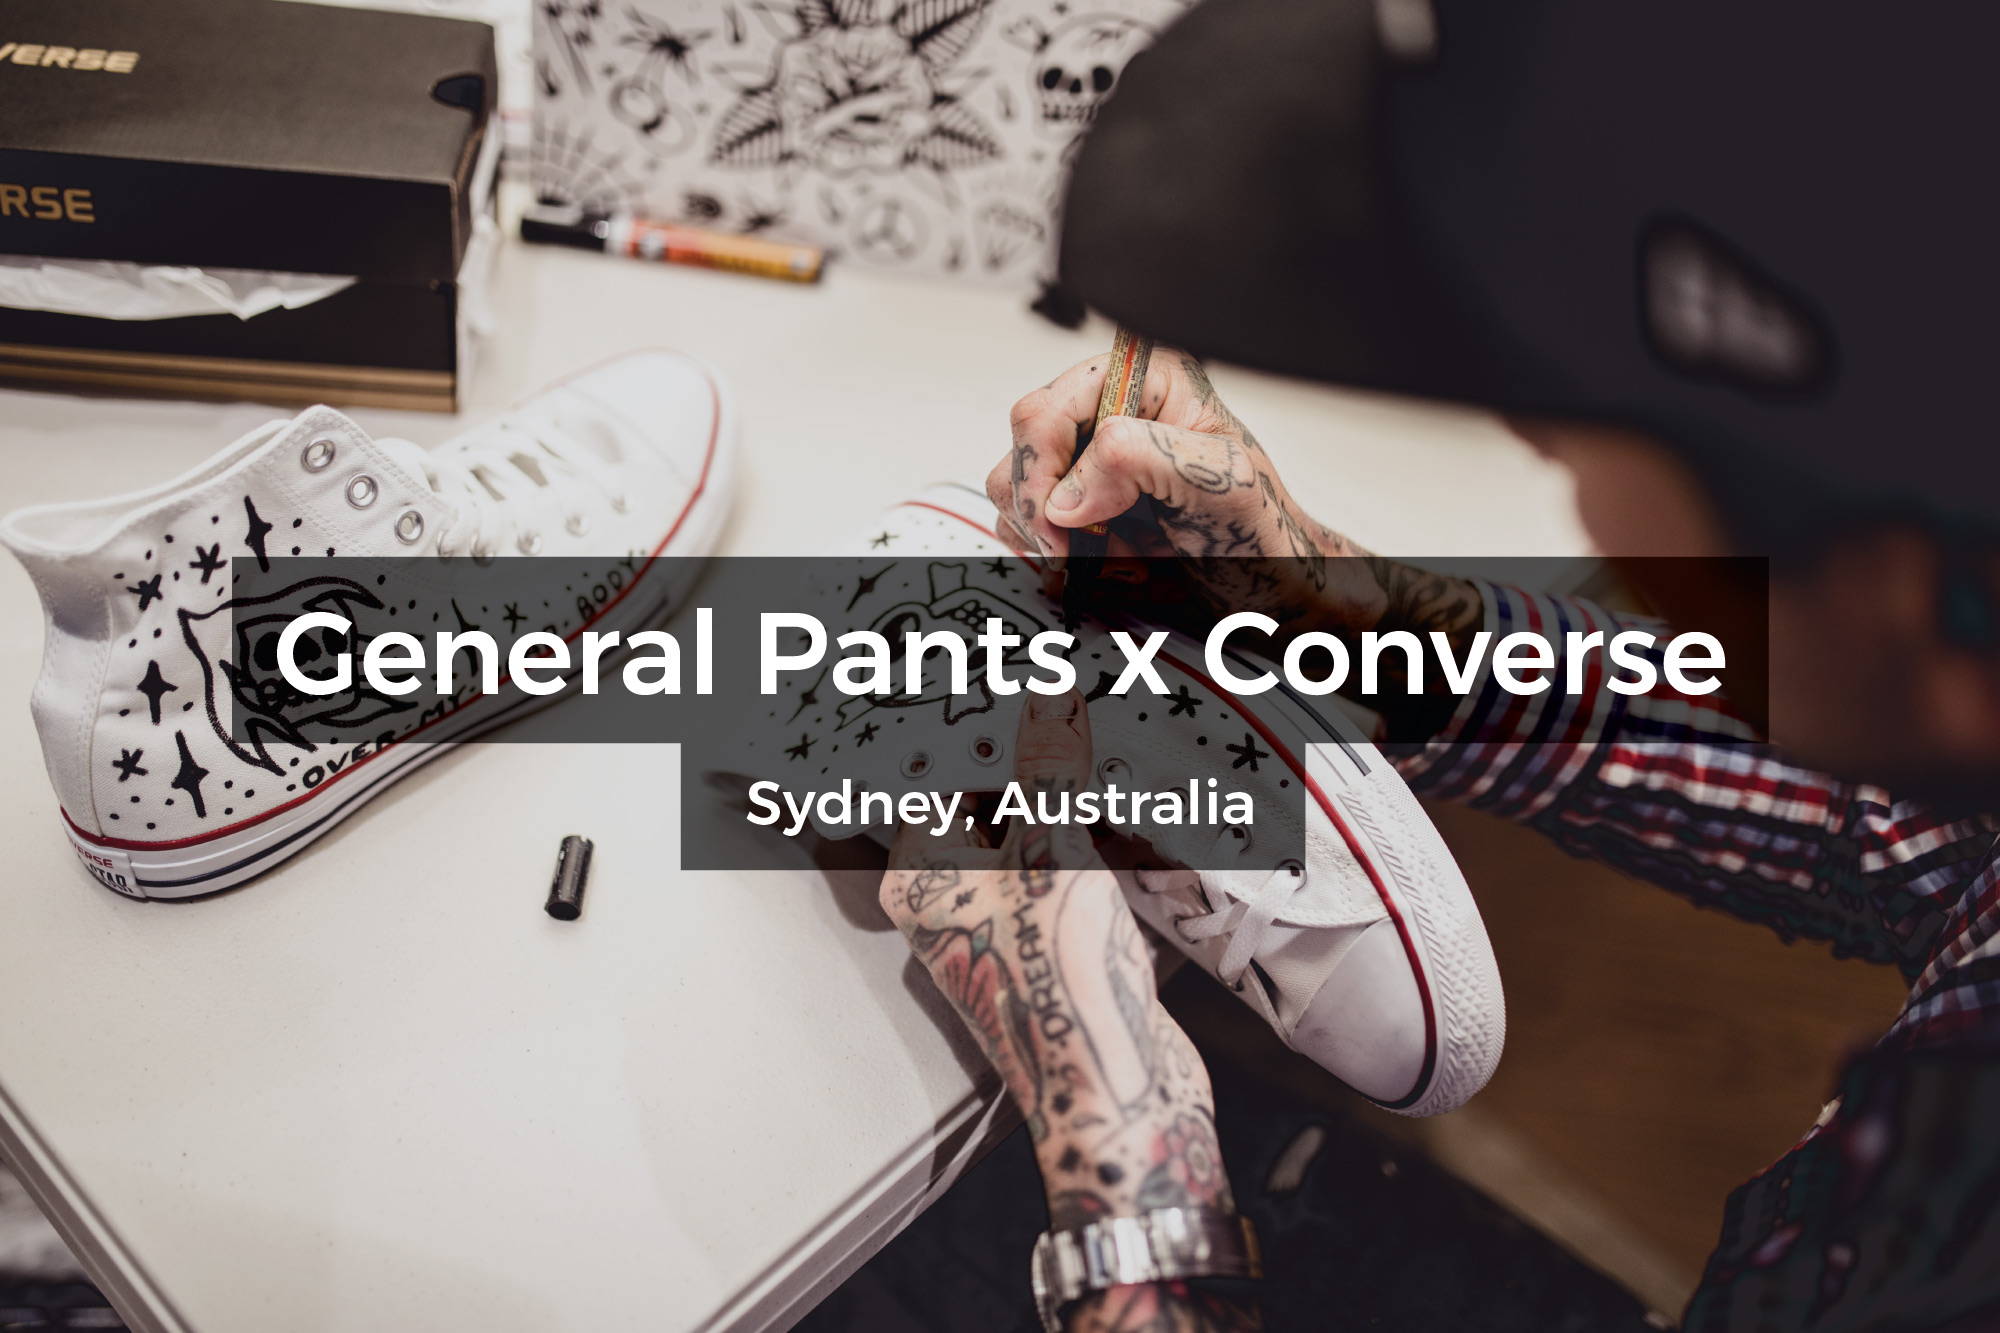 Converse Activcation at General Pants in Sydney, Australia